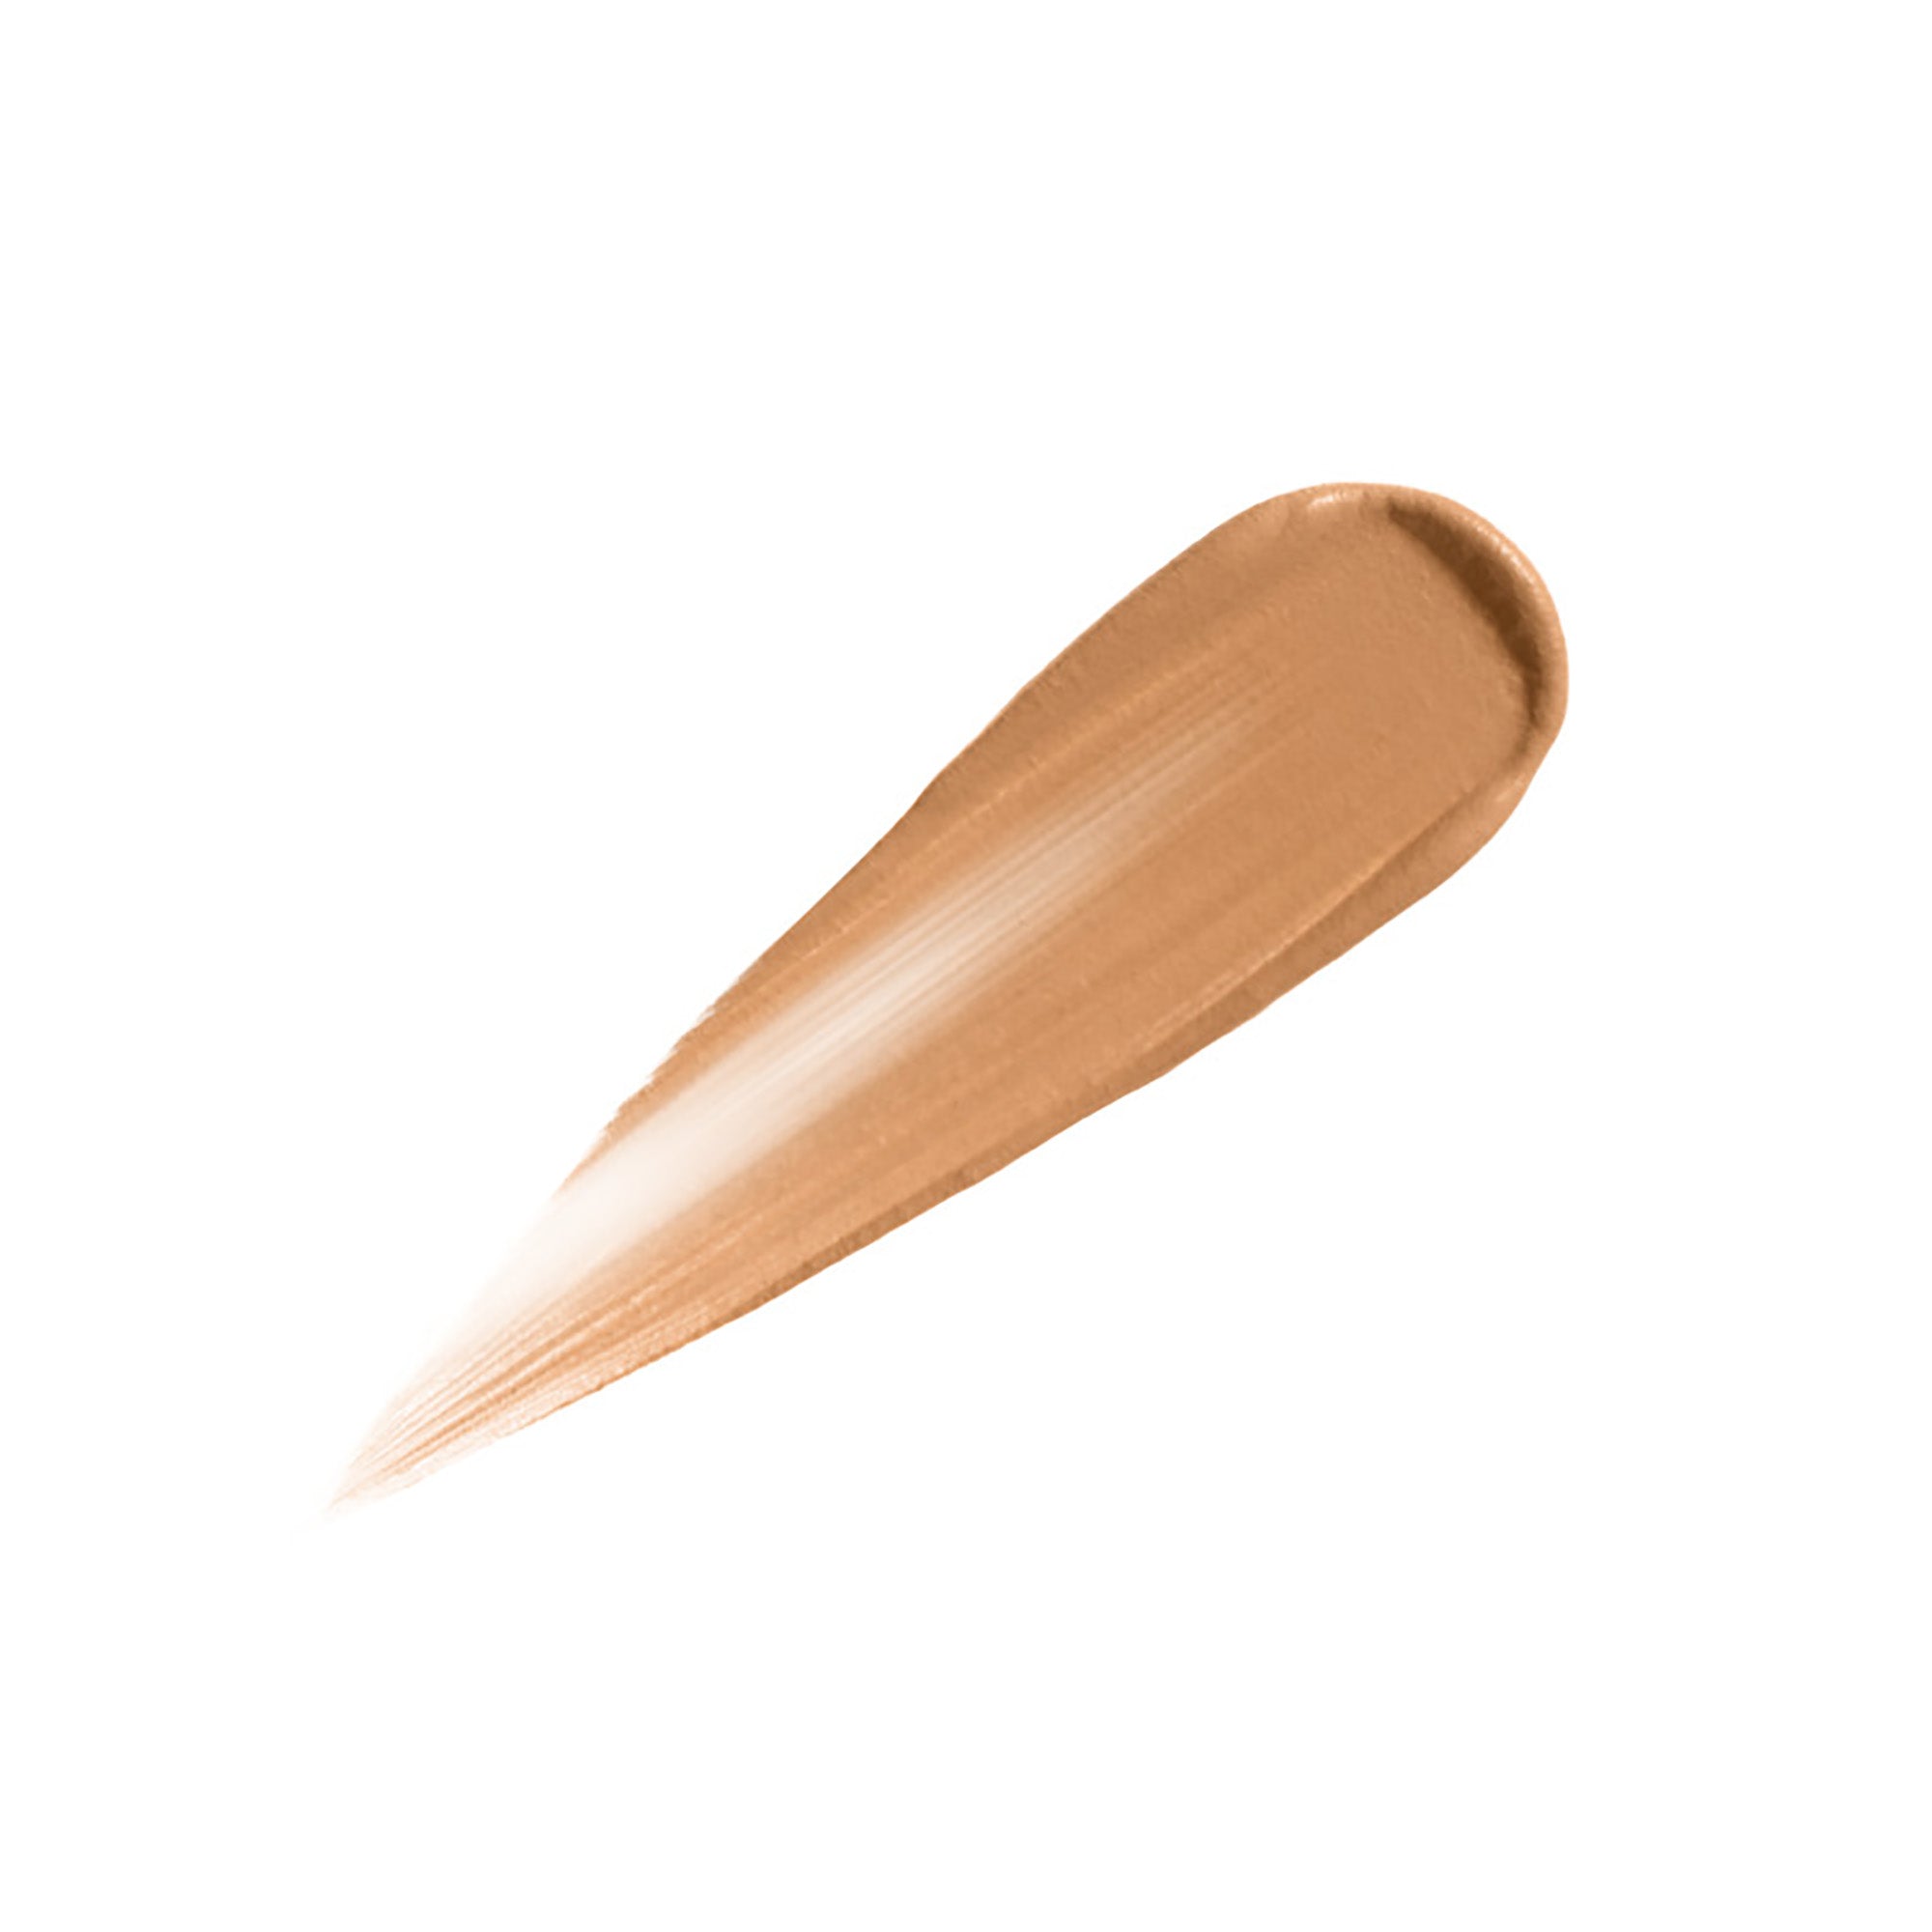 Bare Minerals Complexion Rescue Brightening Concealer SPF 25 / TAN AMBER / SWATCH